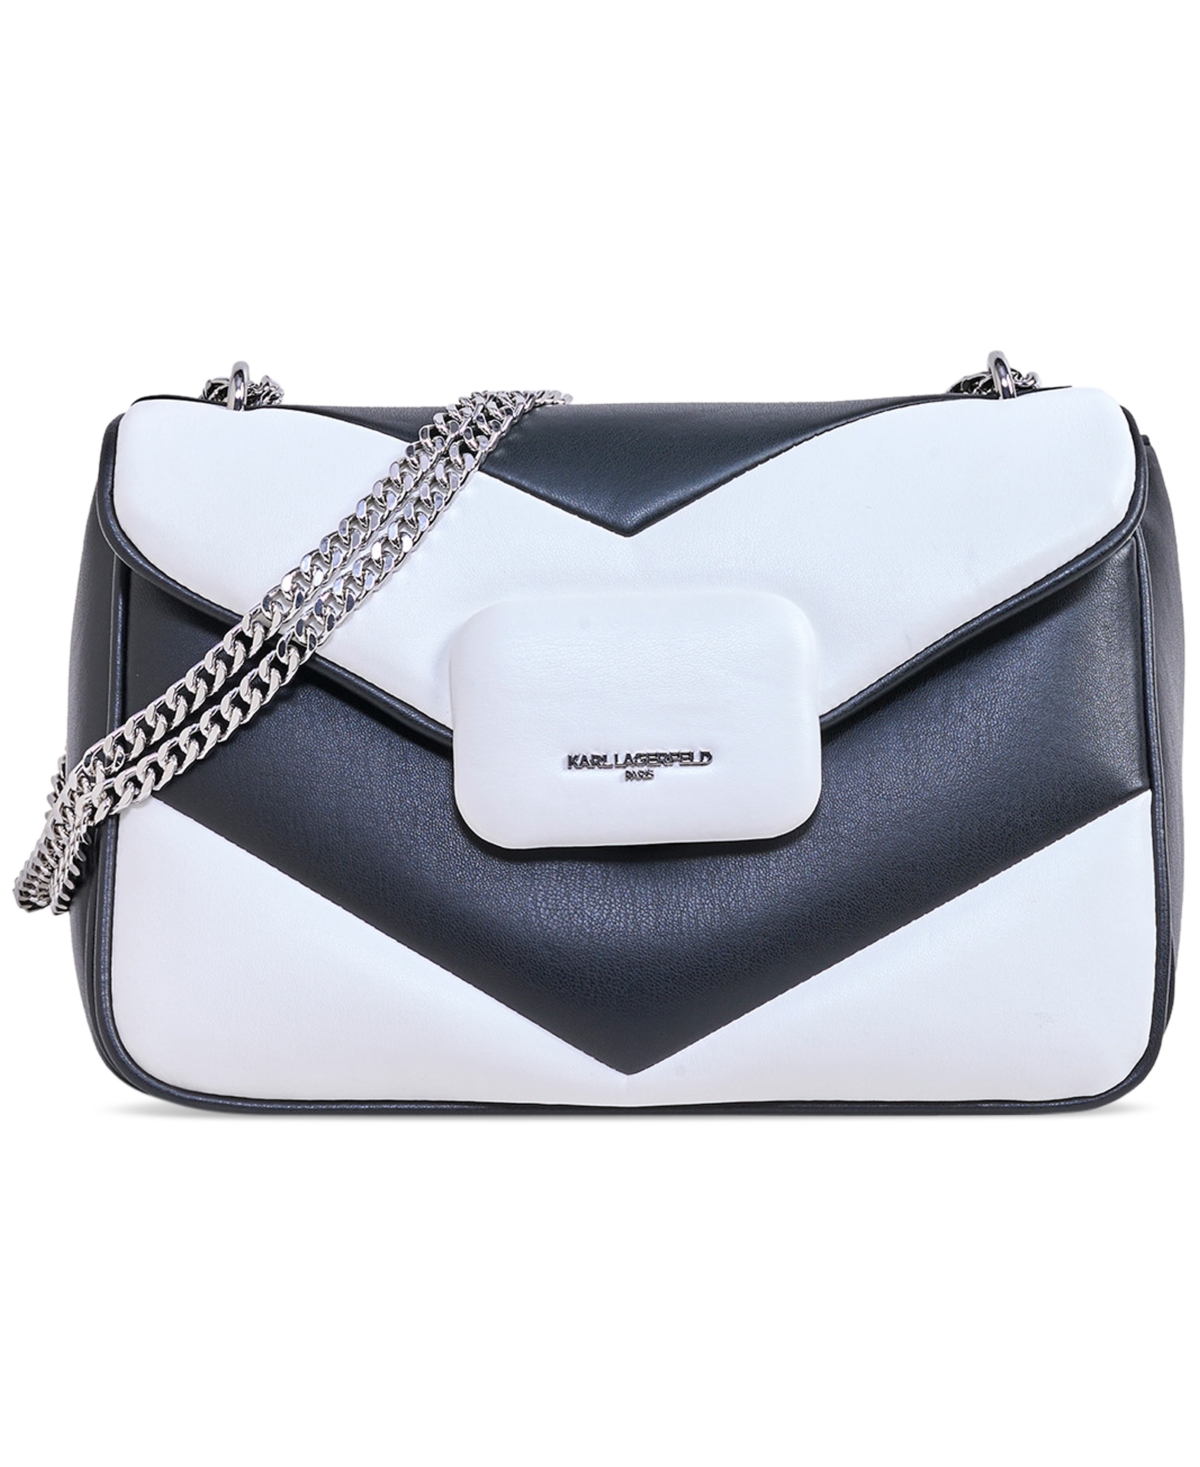 Karl Lagerfeld Fleur Small Quilted Shoulder Bag In Black,wht